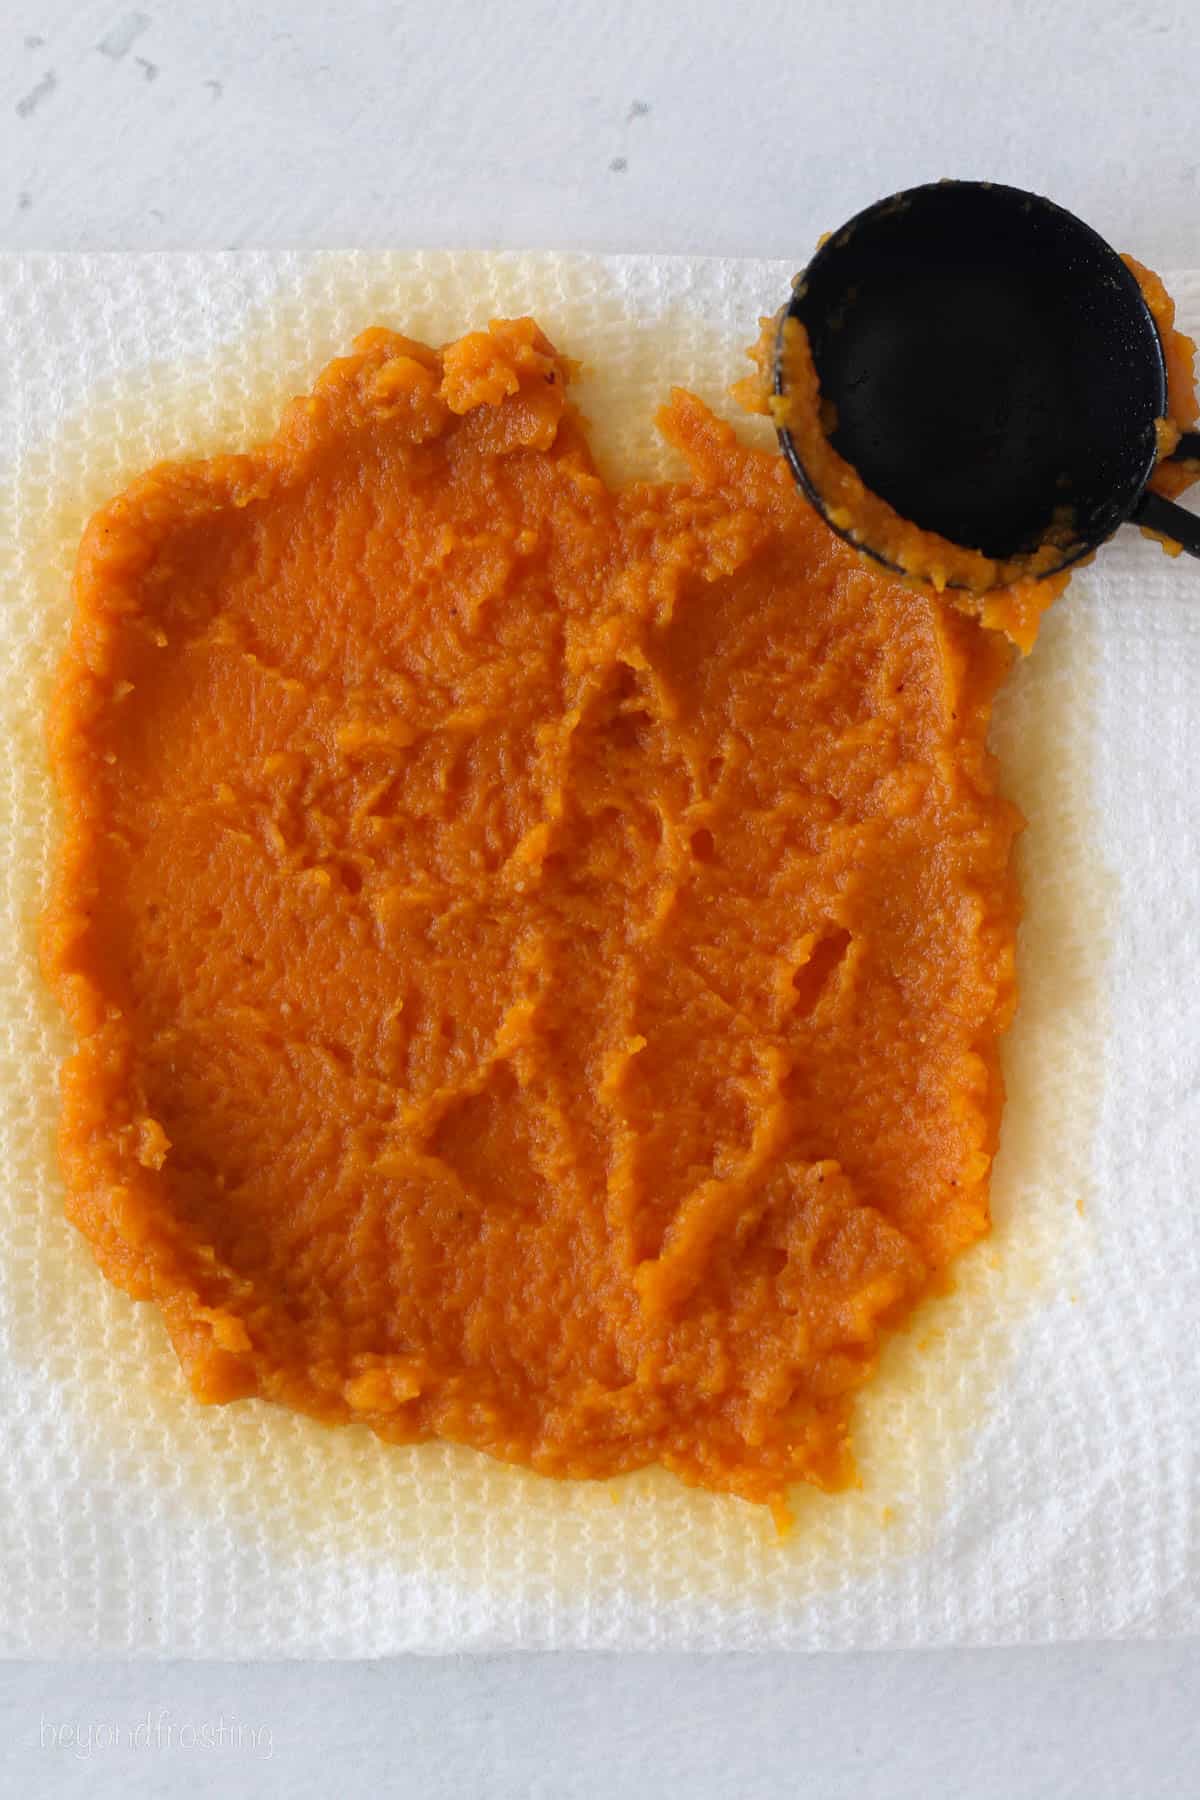 Pumpkin puree spread out over a layer of paper towels to "blot" the excess moisture.